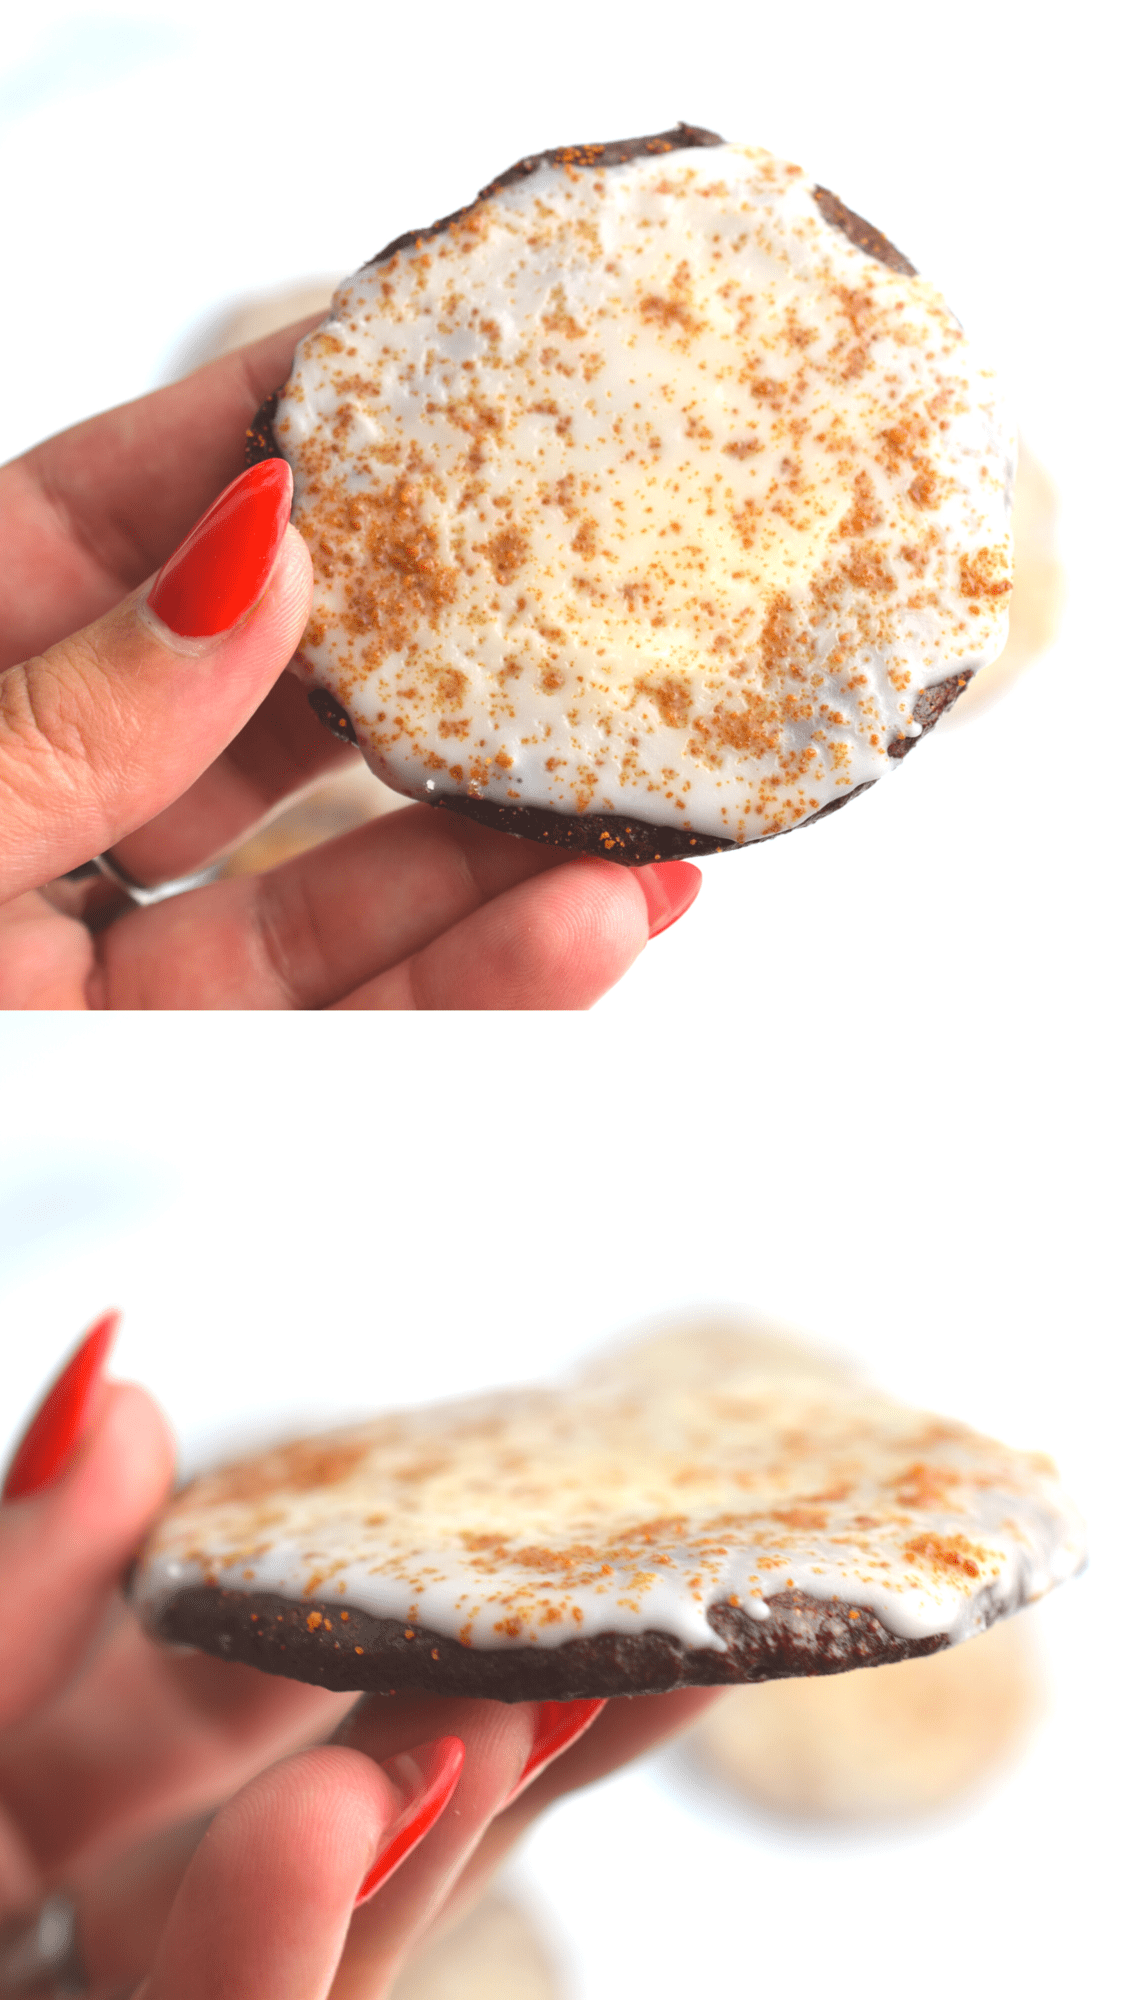 gluten free wafer cookies with icing